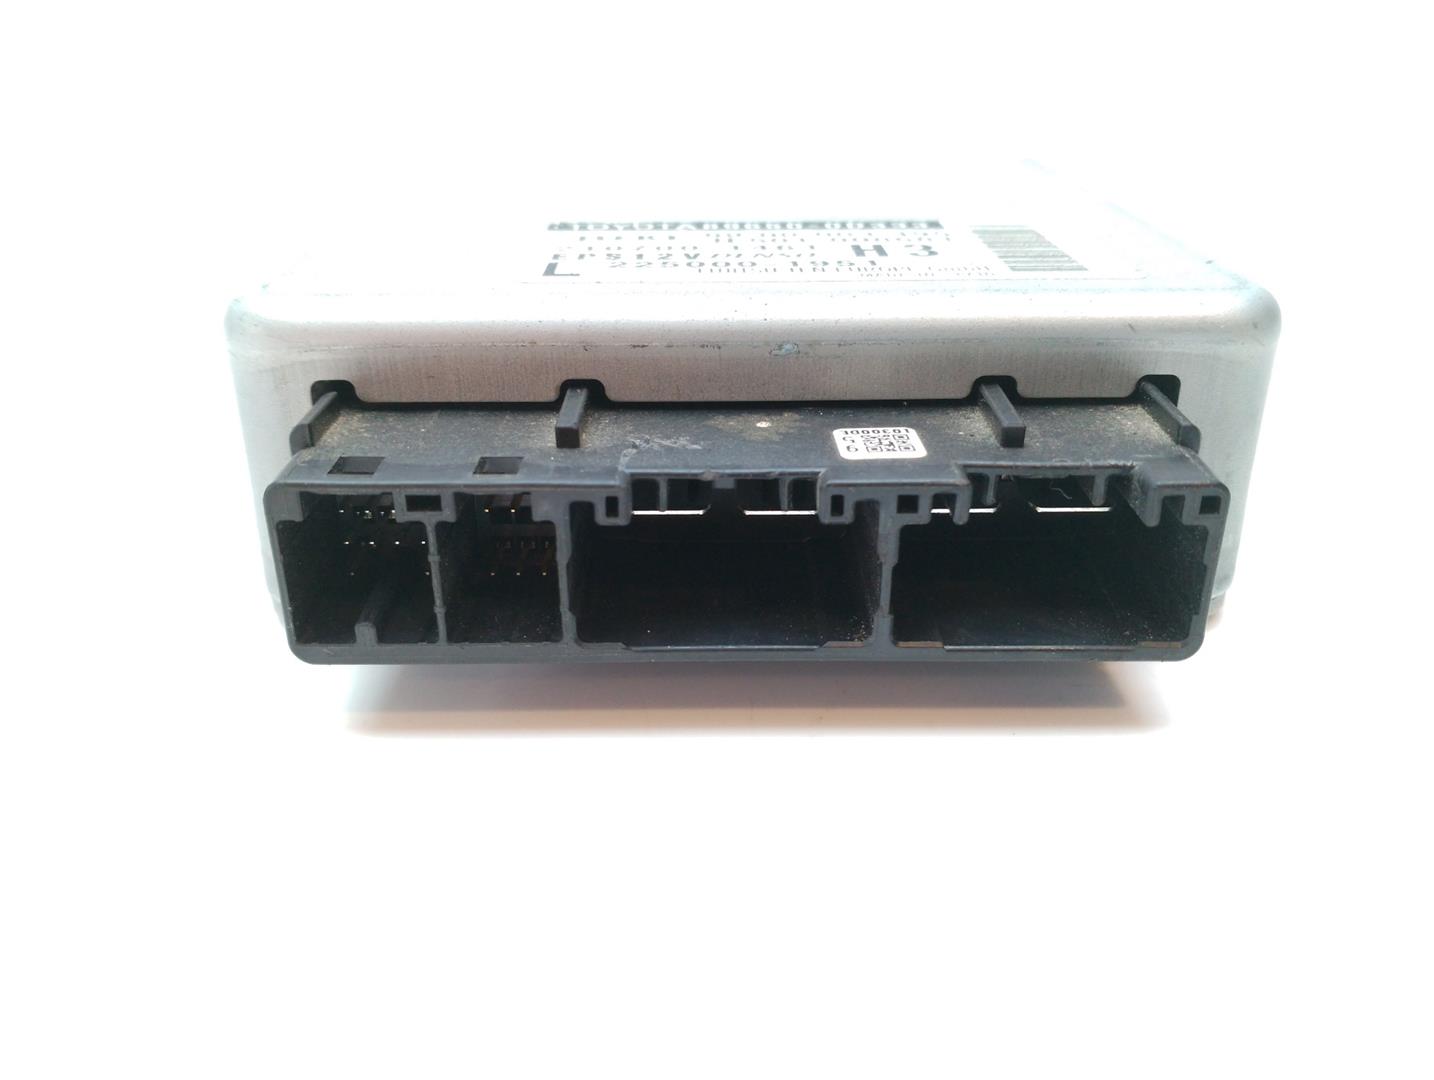 TOYOTA Yaris 3 generation (2010-2019) Other Control Units 896500D333, 2107001461 22705610